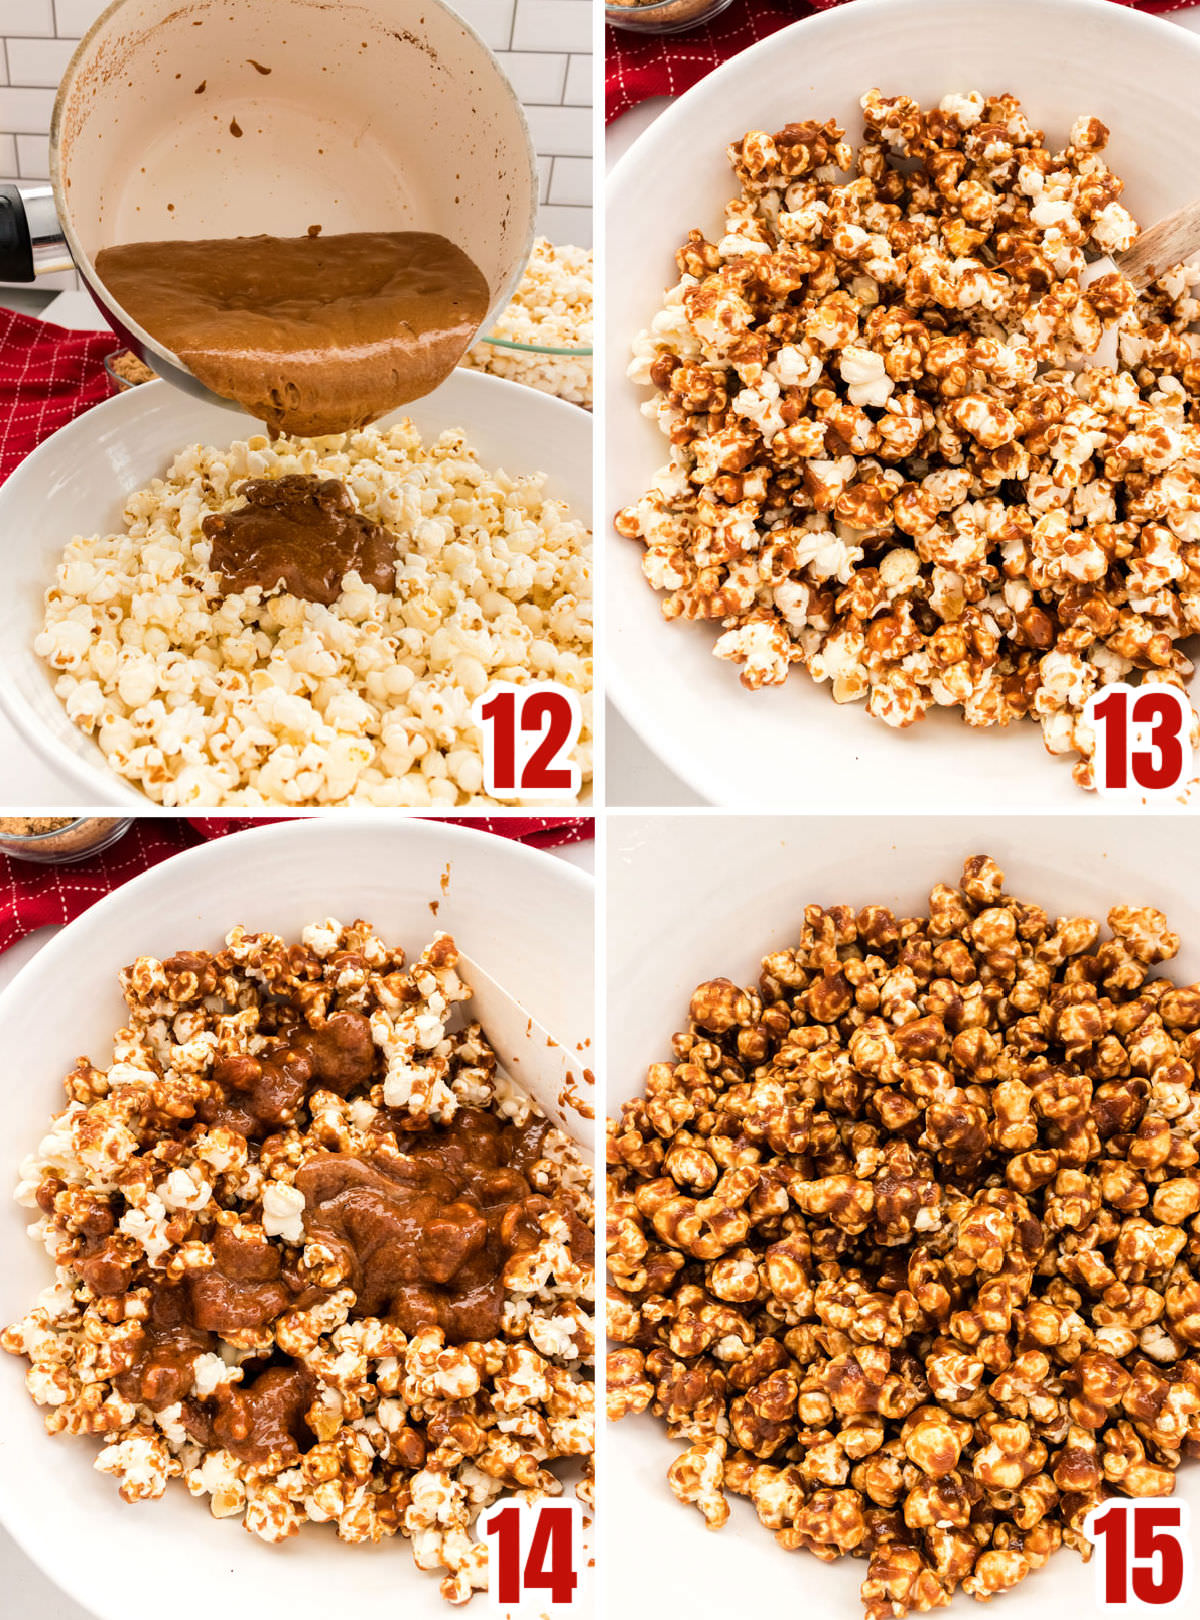 Collage image showing the steps for adding the caramel mixture to the popcorn to make the caramel corn.